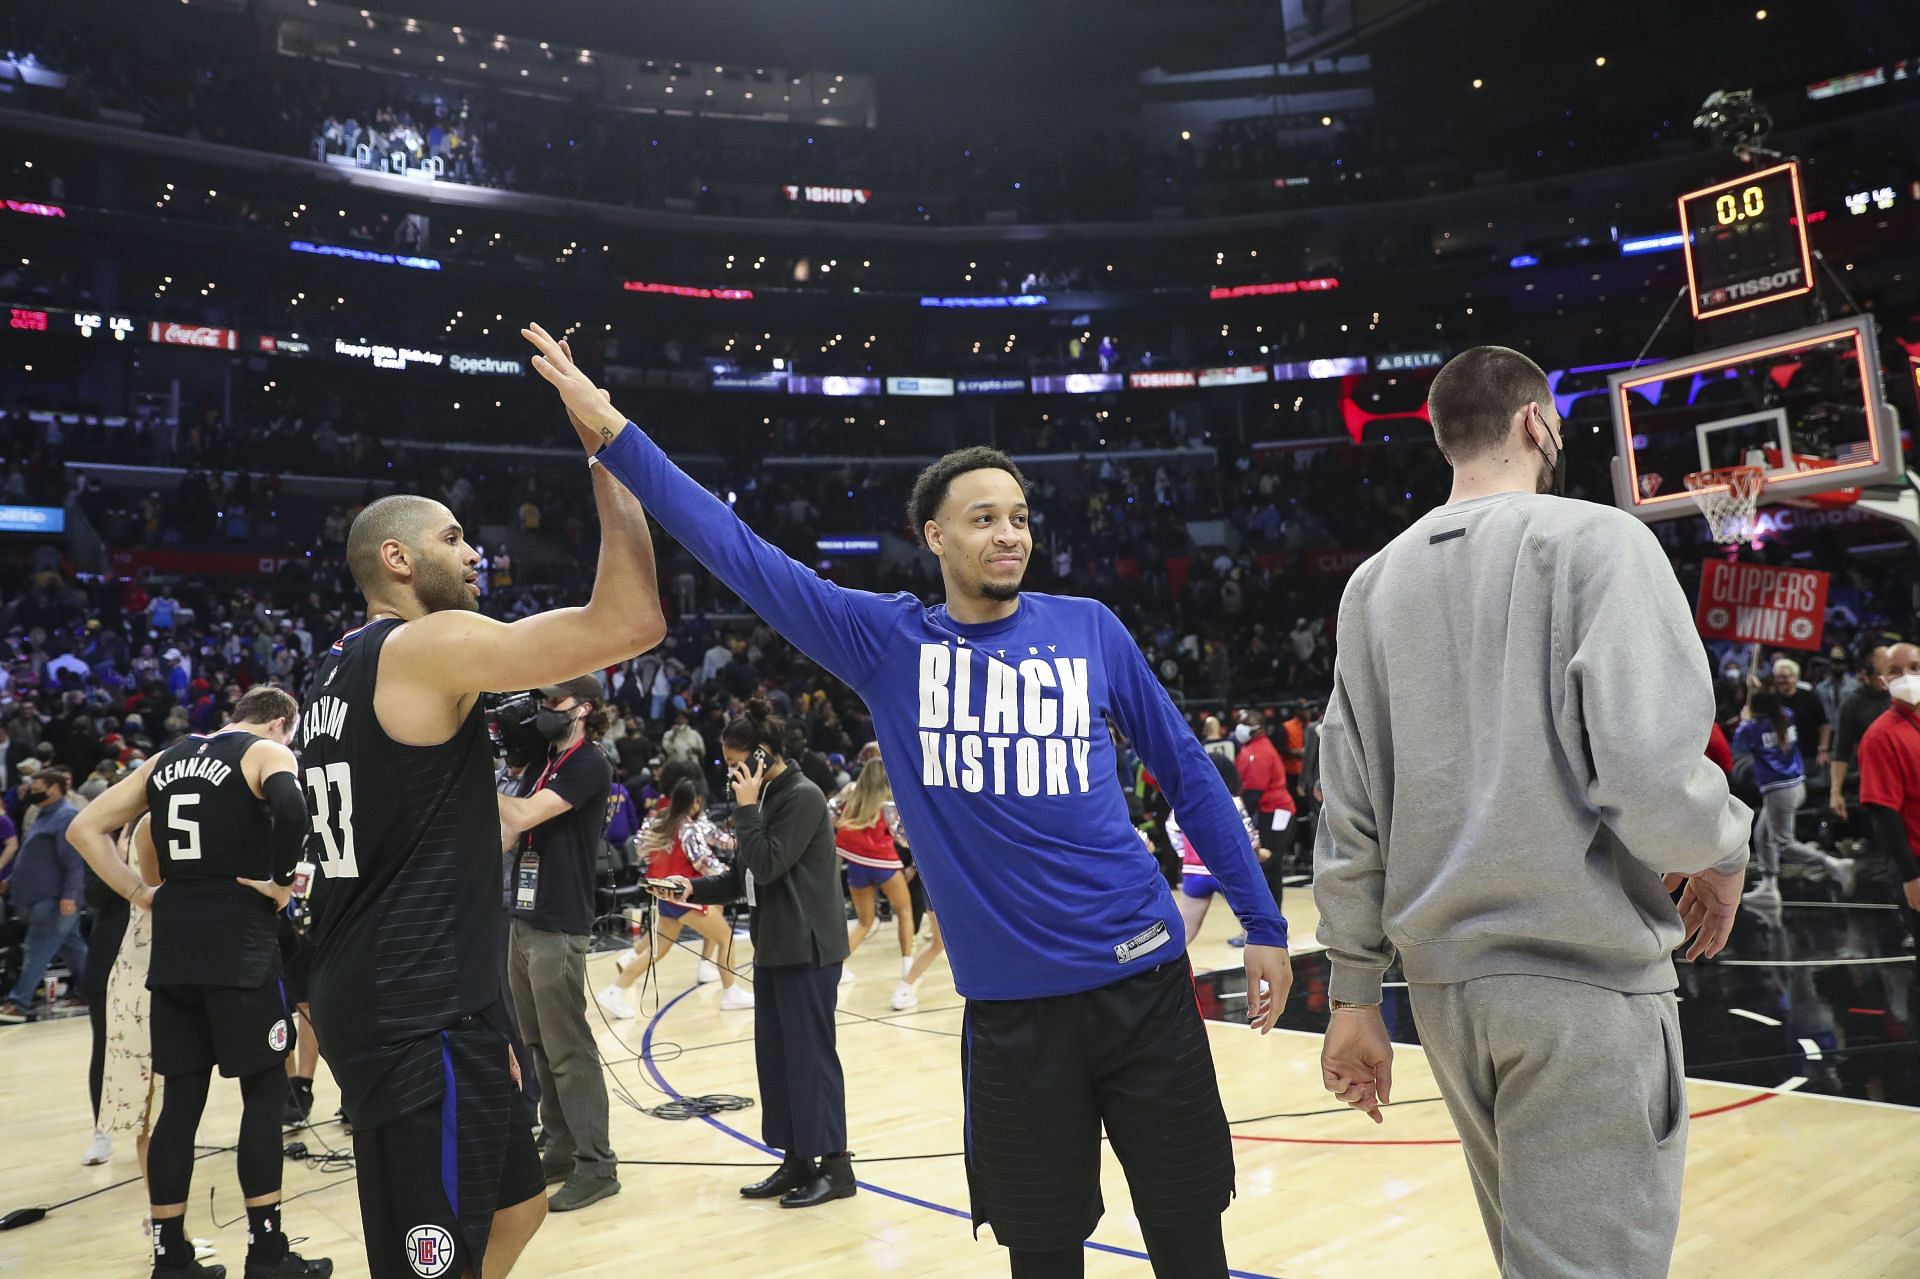 Amir Coffey and Nicolas Batum of the LA Clippers celebrate their win over the Lakers